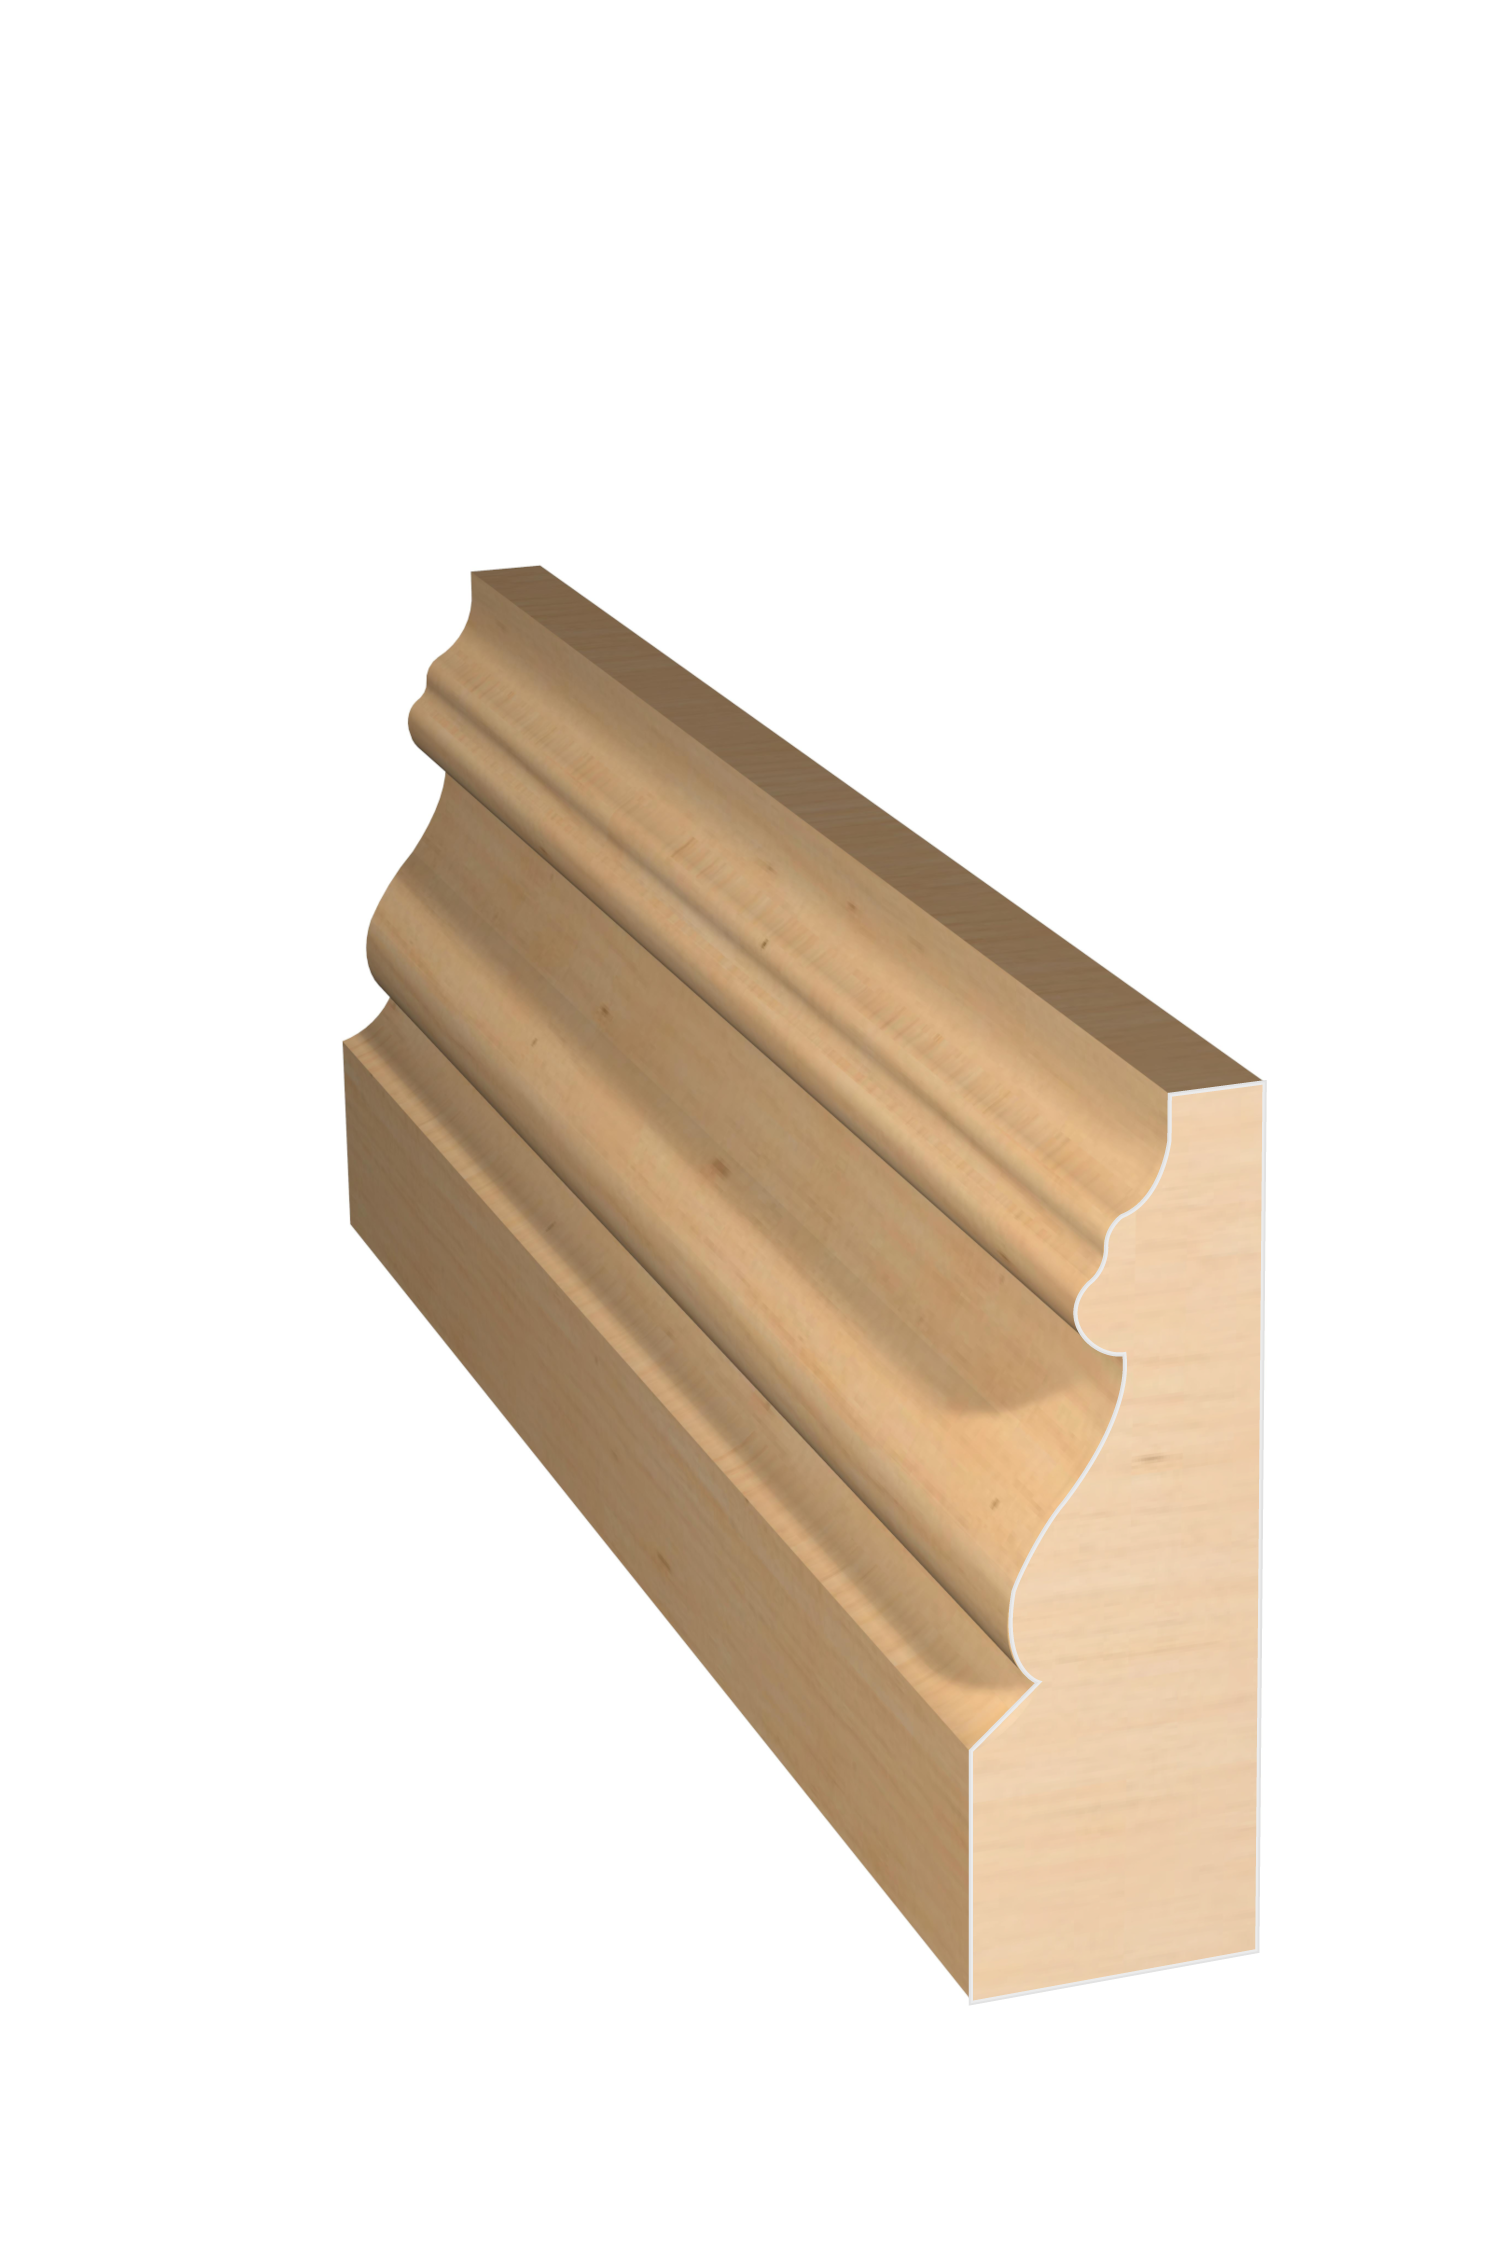 Three dimensional rendering of custom casing wood molding CAPL21434 made by Public Lumber Company in Detroit.